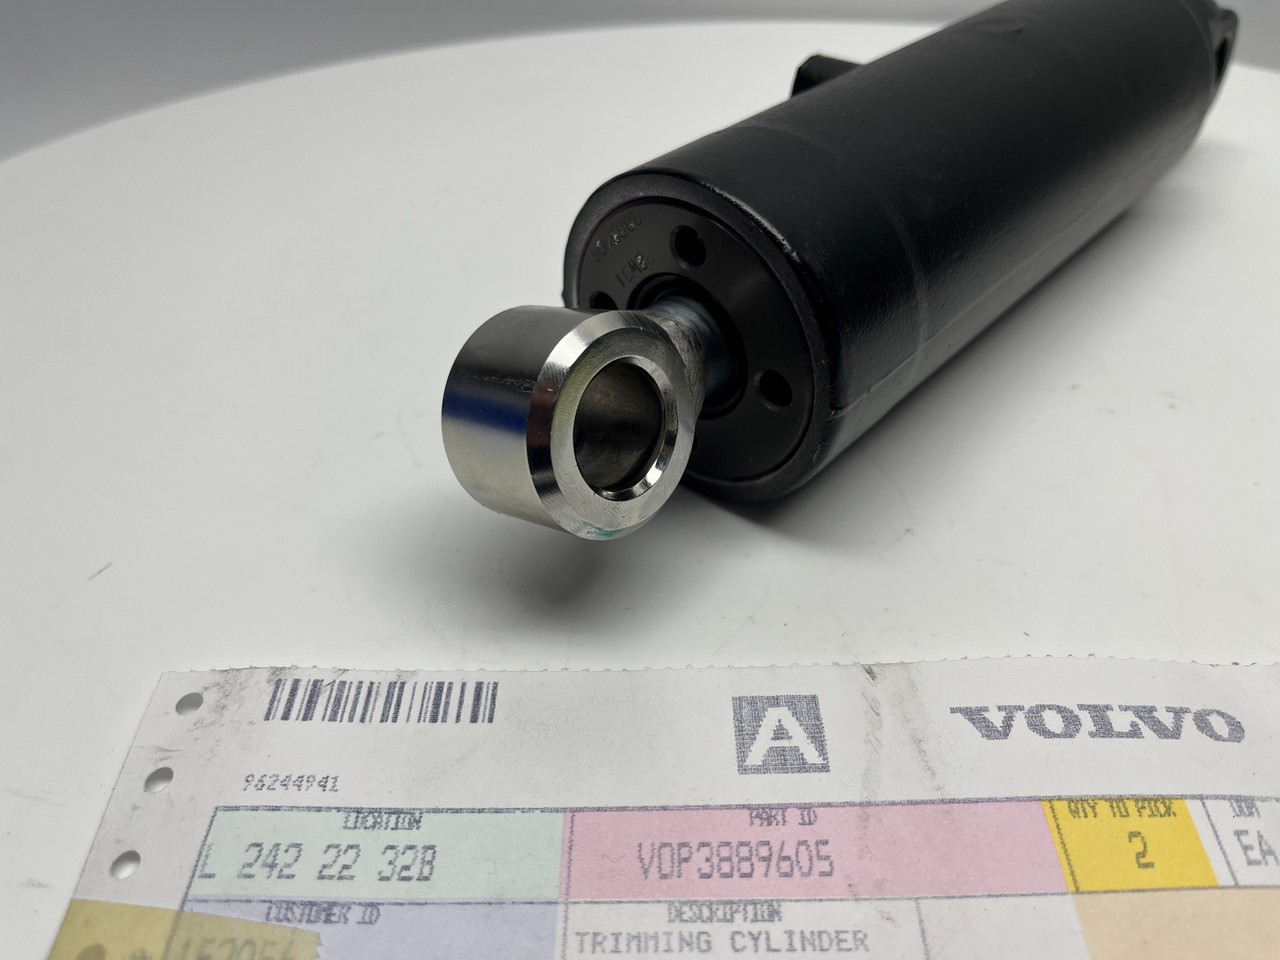 $799.99* GENUINE VOLVO no tax* XDP TRIMMING CYLINDER 3889605 *In Stock & Ready To Ship!